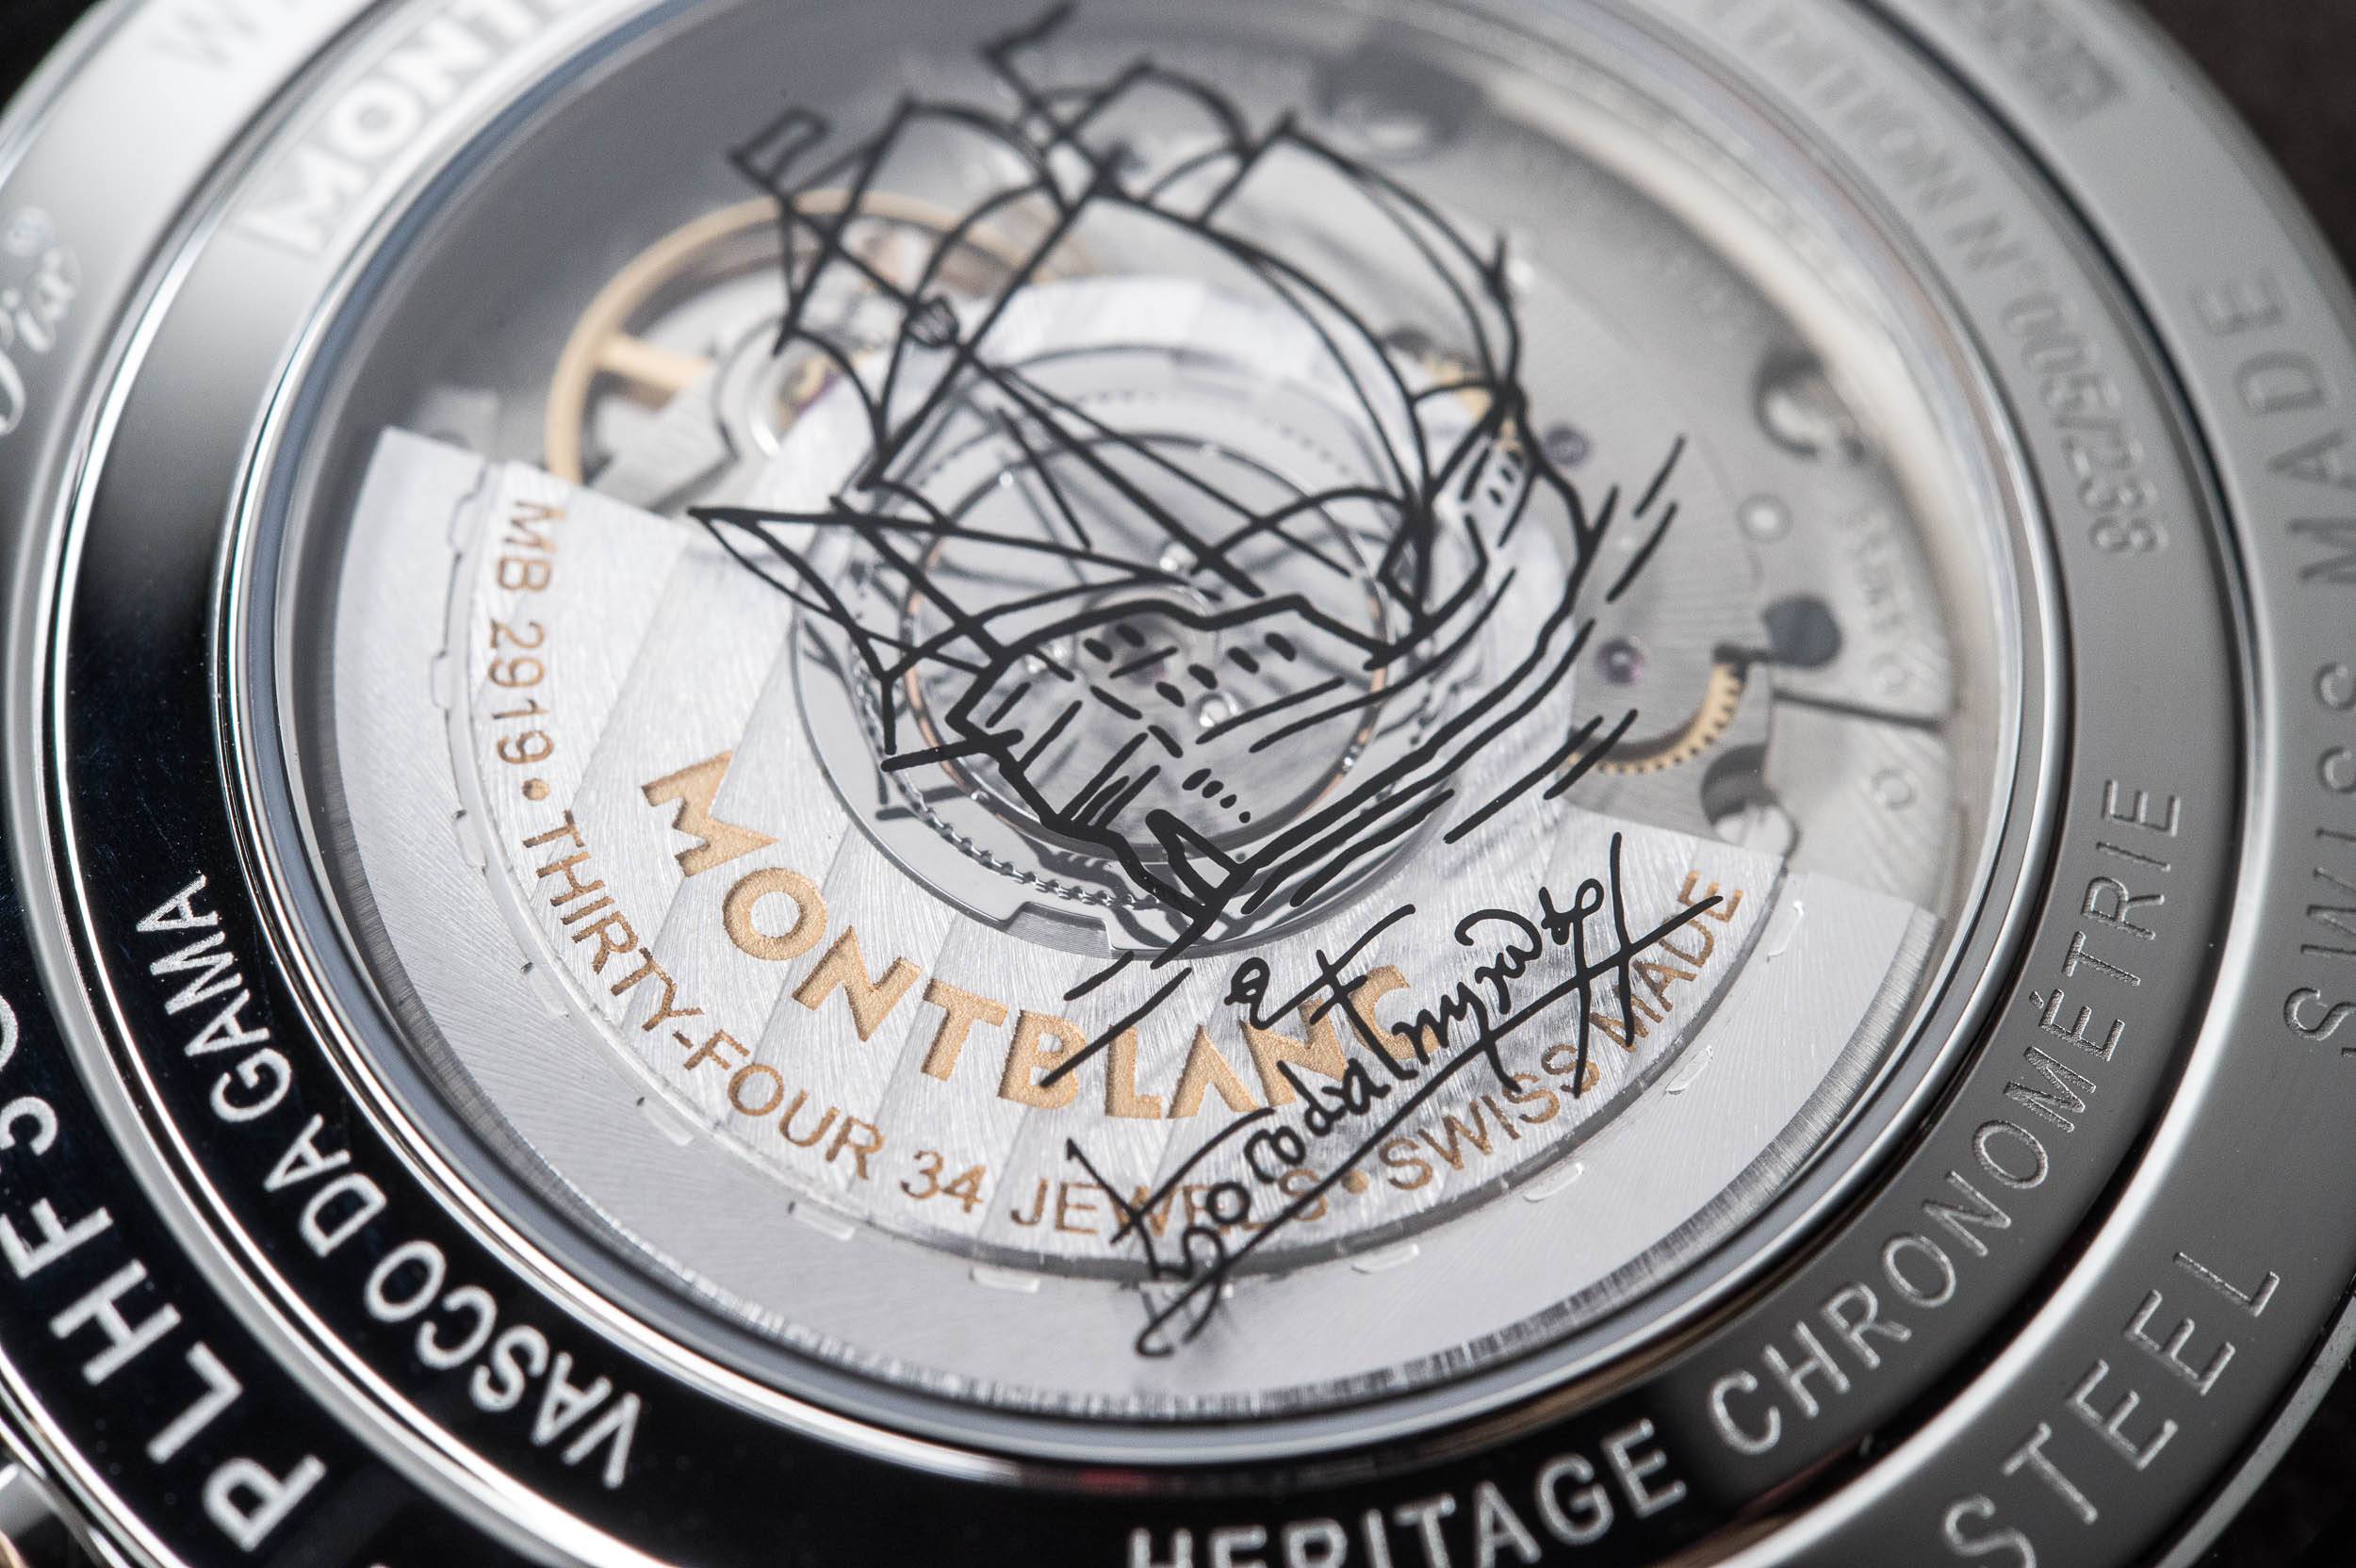 Montblanc Heritage Chronométrie Dual Time Vasco da Gama Limited Edition 238 Watches And Wonders Wrist Back Clos Up